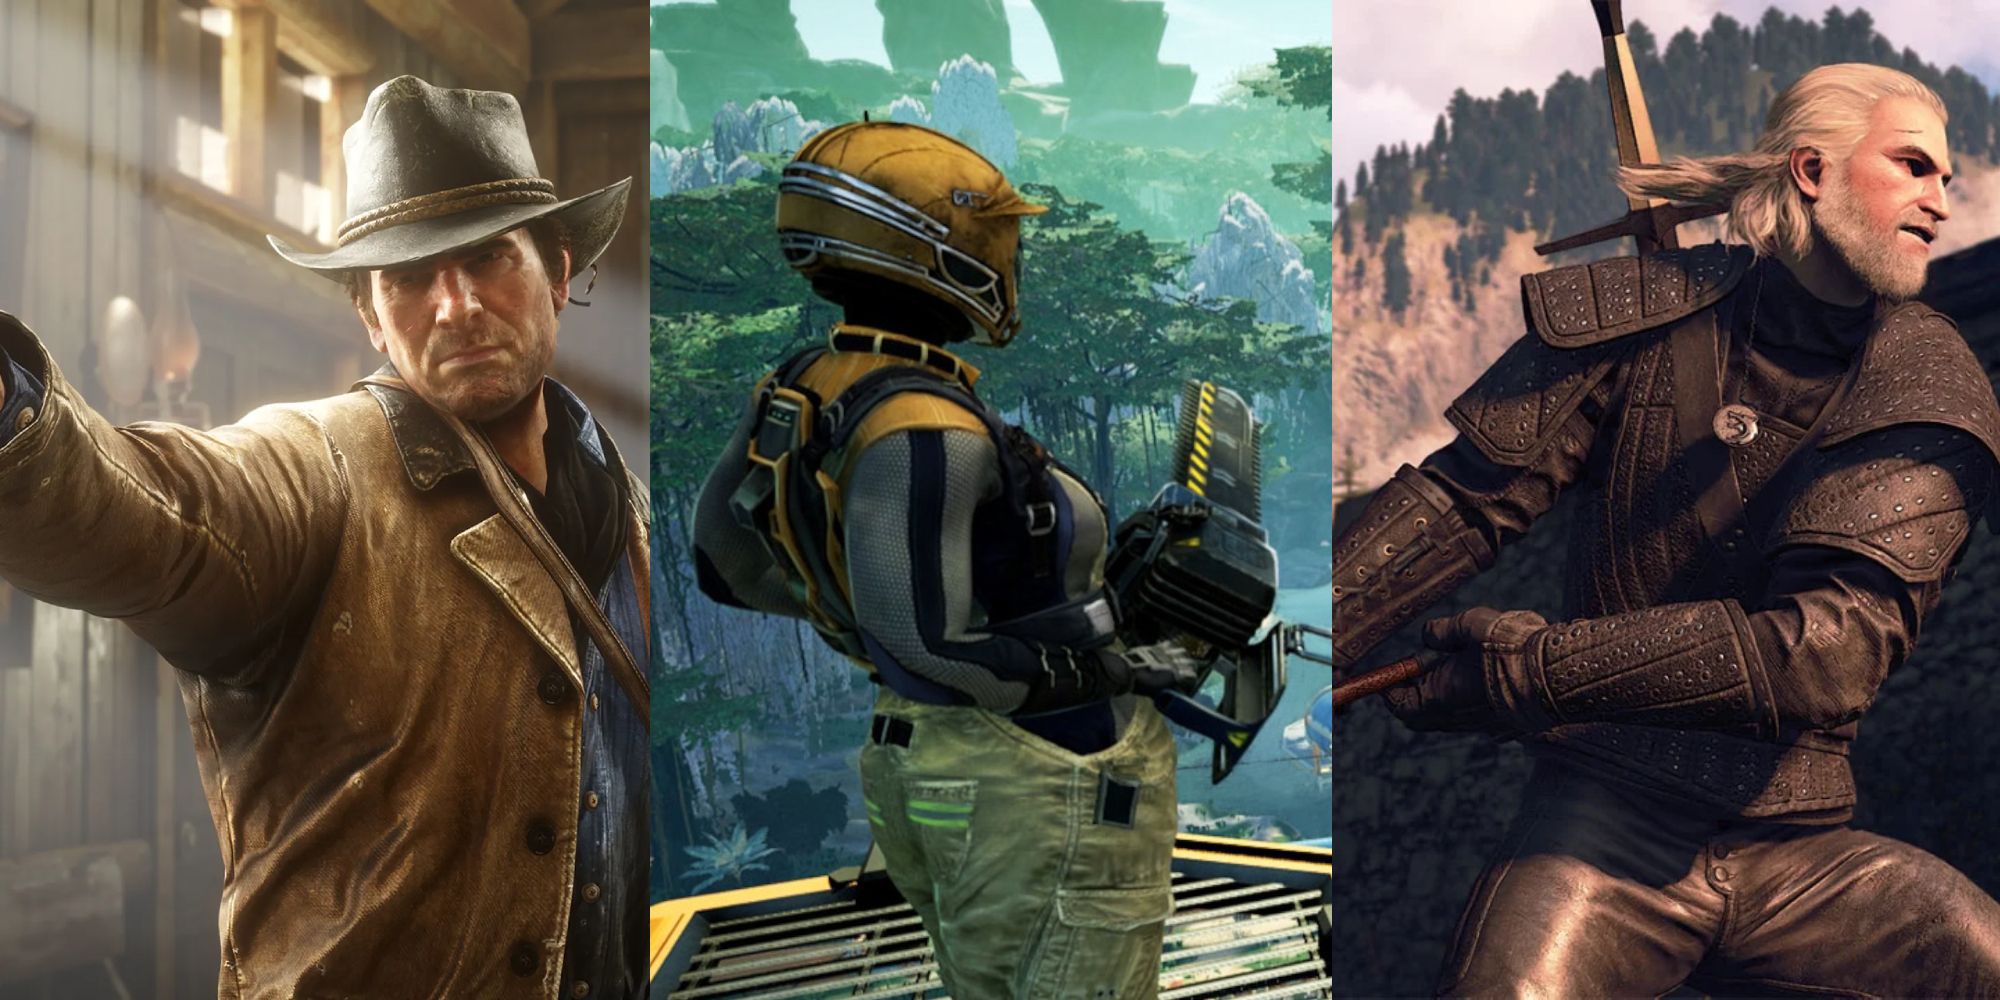 Split image of Arthur Morgan from Red Dead Redemption 2 aiming his gun, an astronaut from Satisfactory overlooking a factory, and Geralt from The Witcher 3, with his sword in a combat stance.